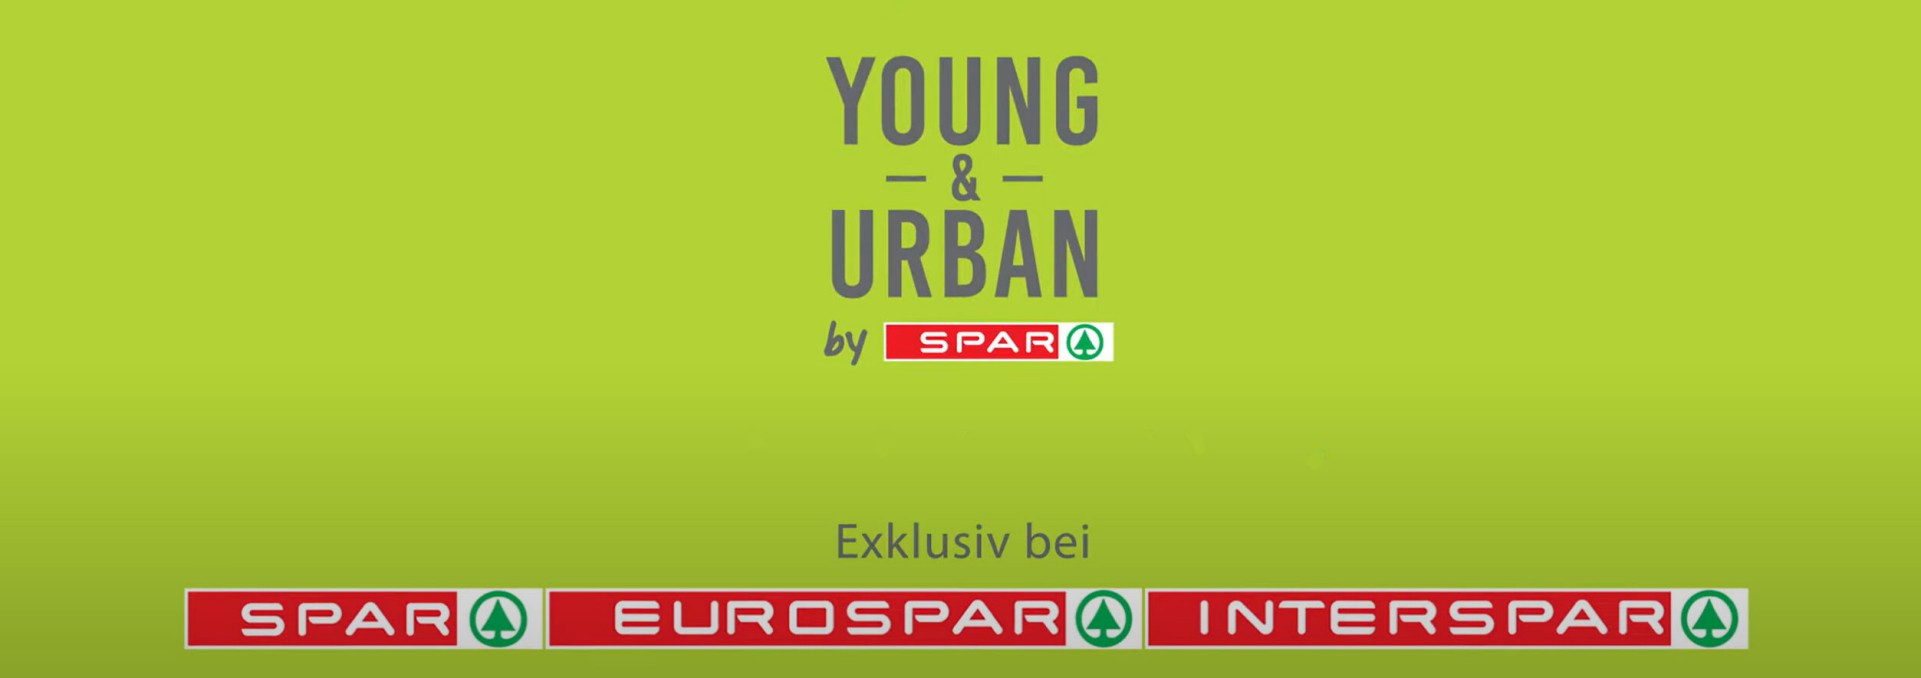 Young & Urban